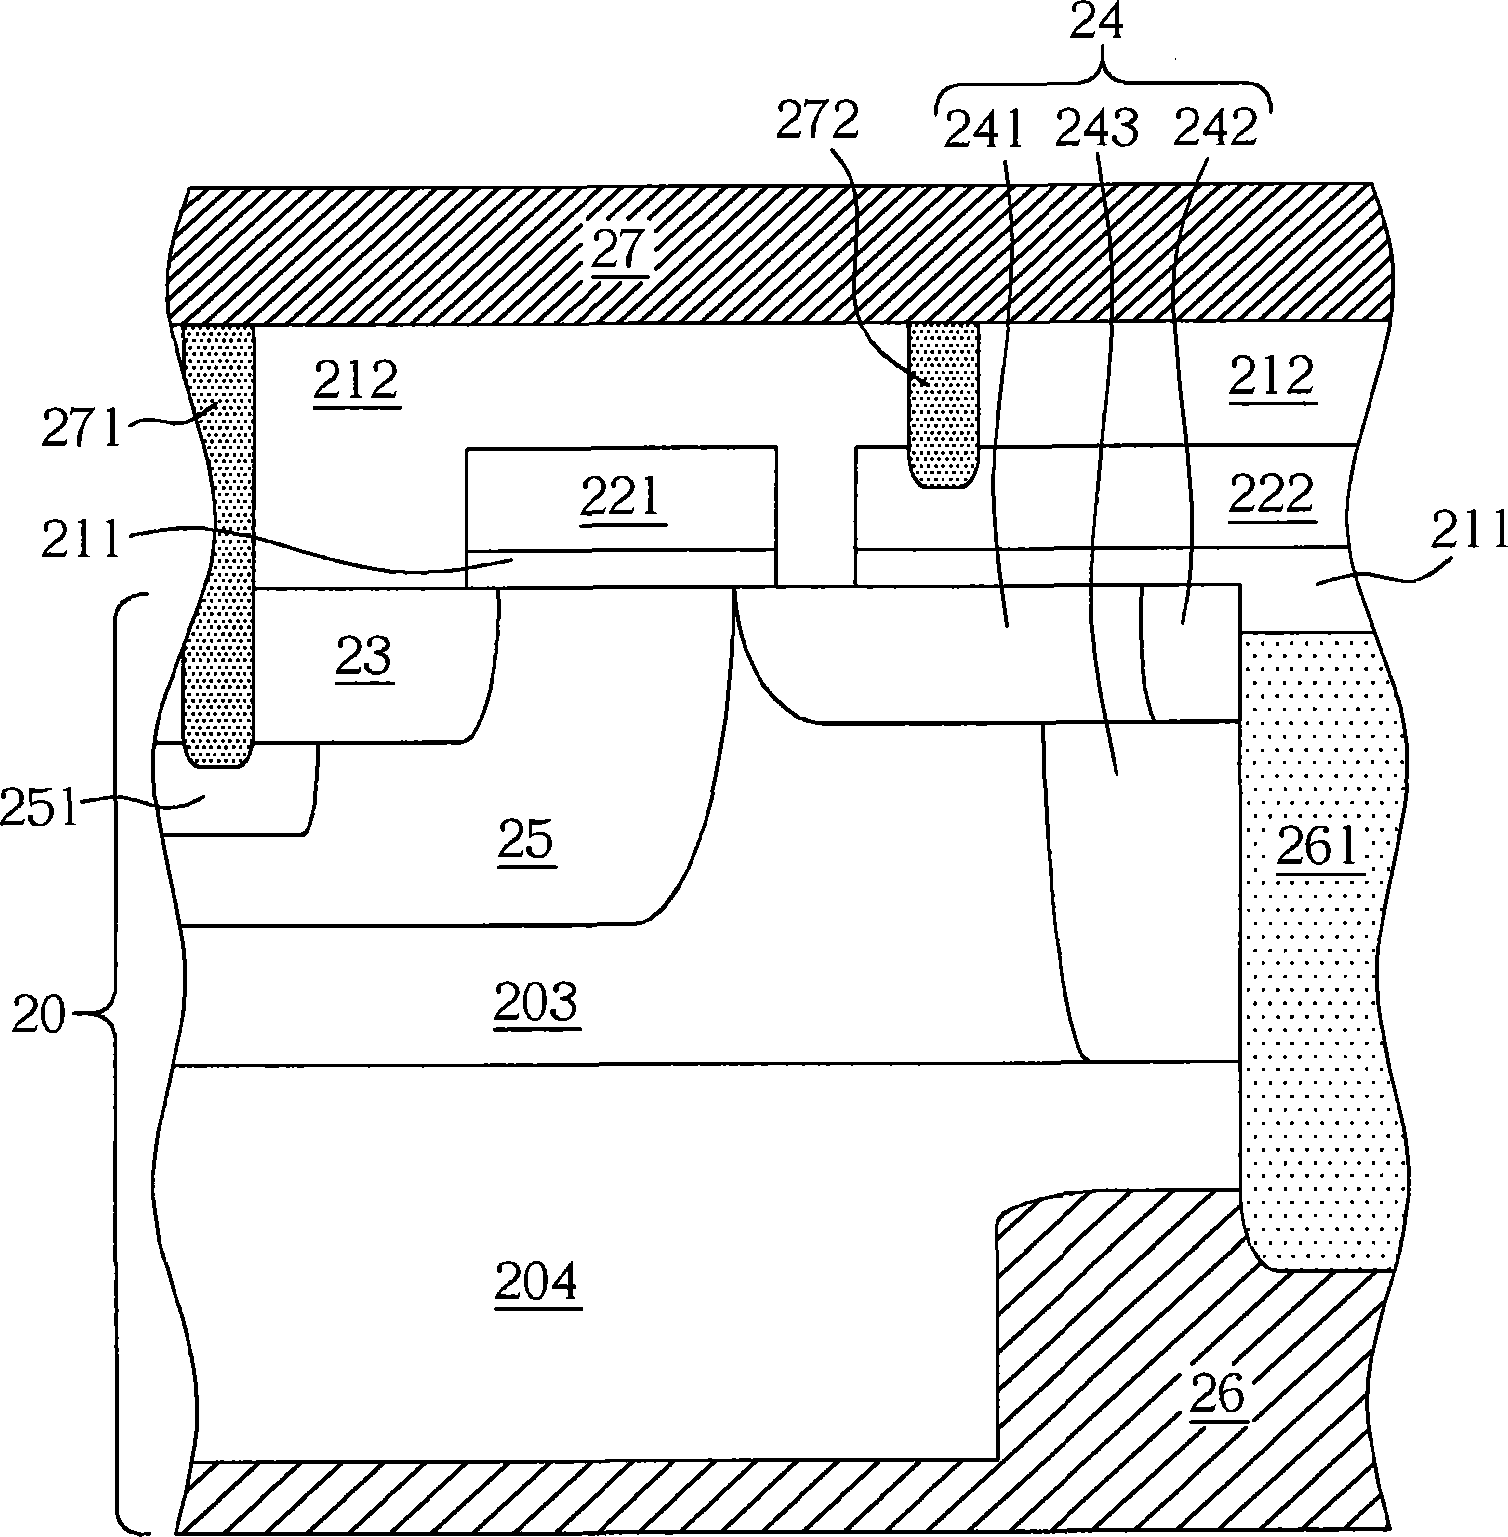 Lateral diffusion metal oxide semiconductor assembly